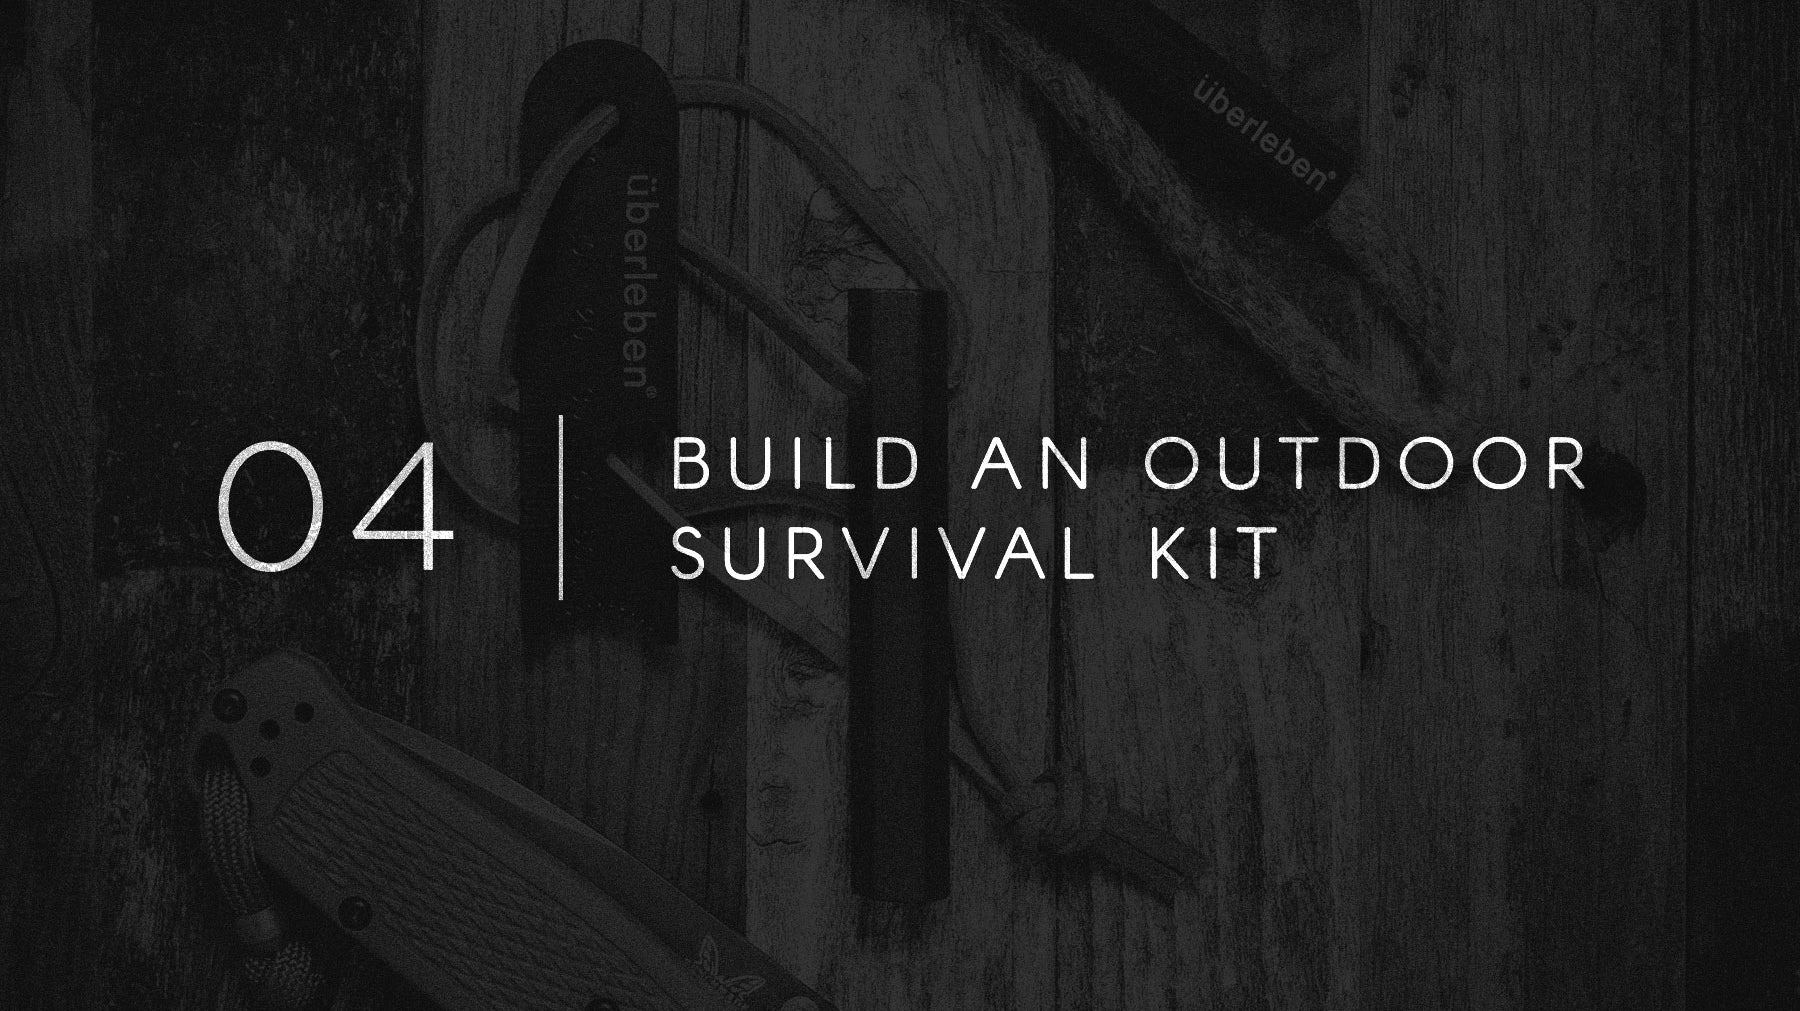 Field Notes 04 - Build An Outdoor Survival Kit